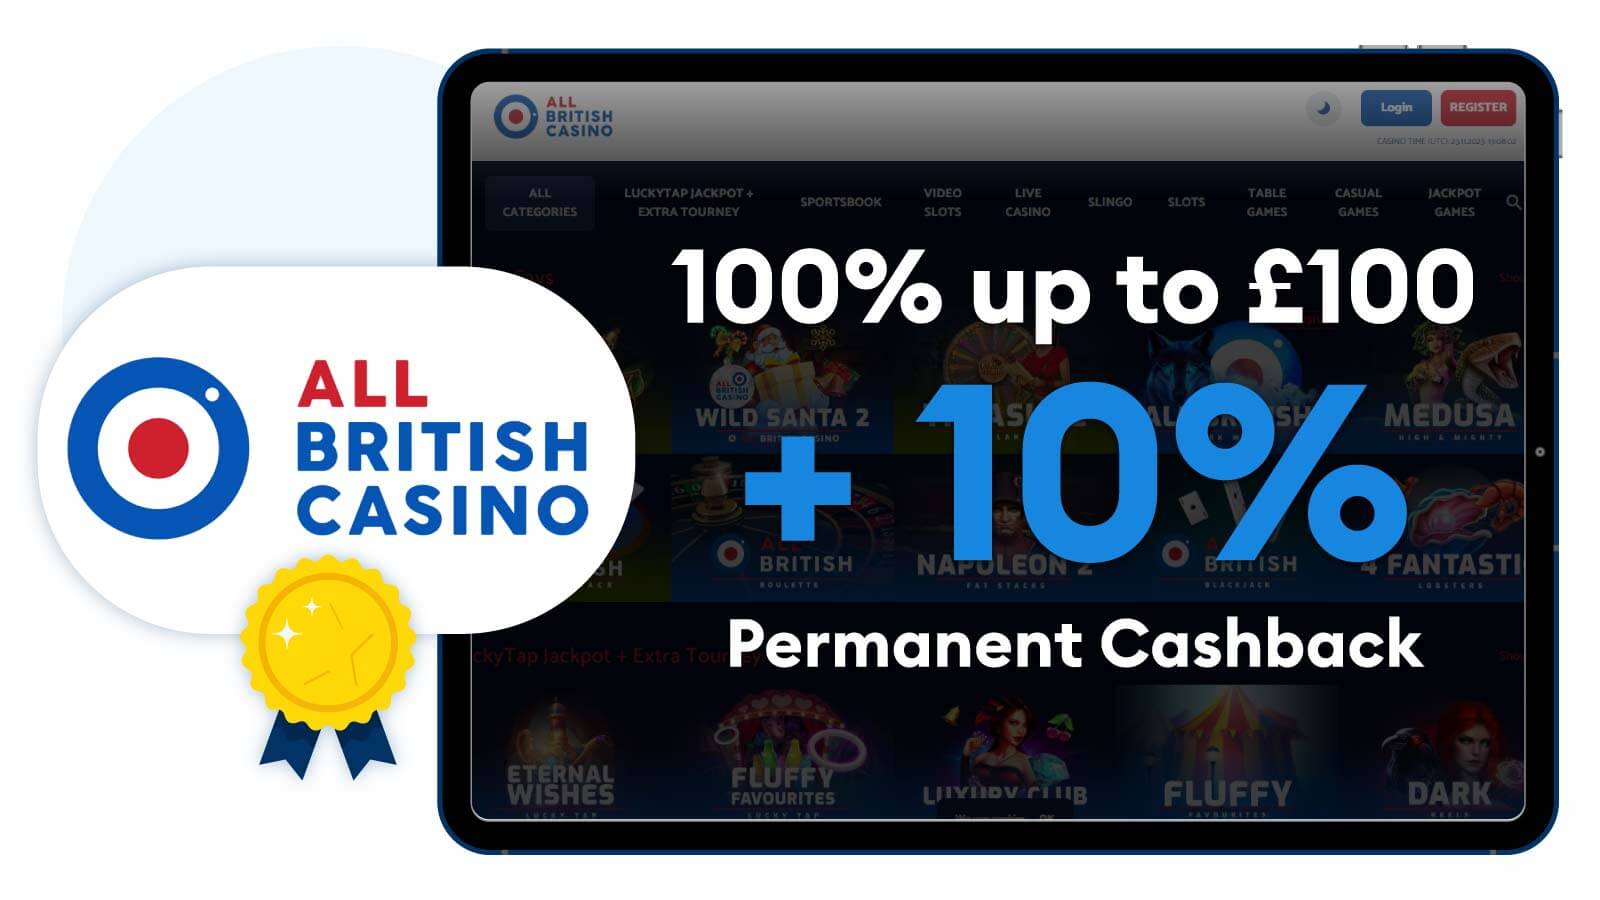 Our Best Pick All British Casino 100% up to £100 and 10% permanent cashback